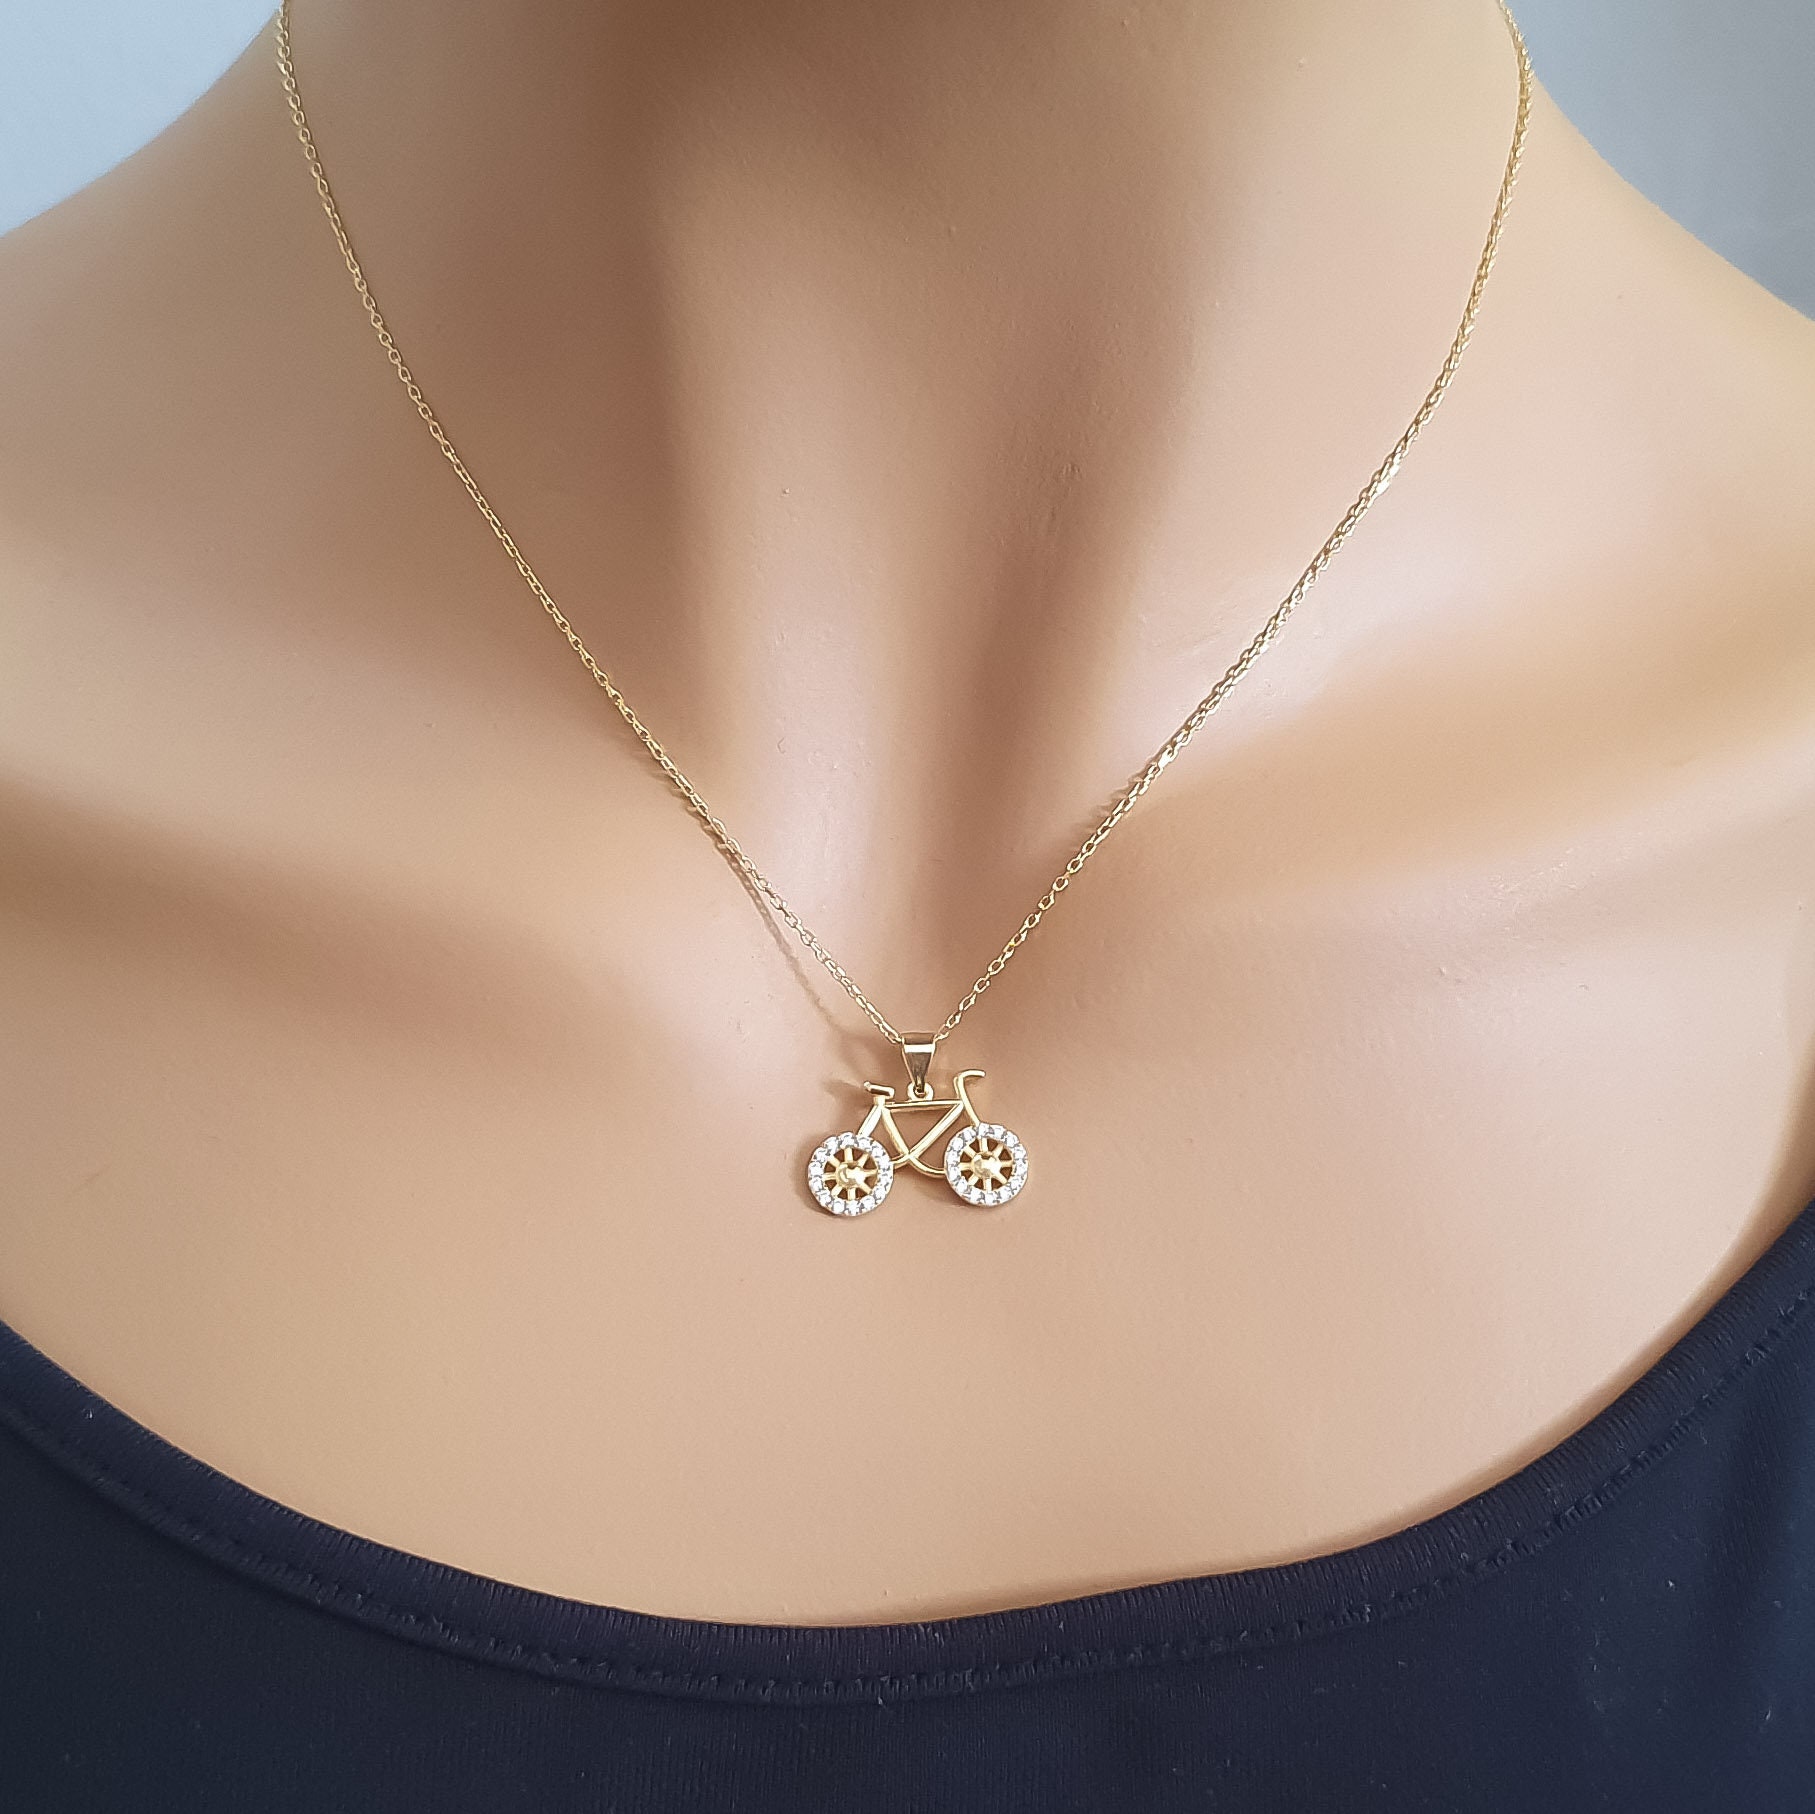 Bike Gold Pendant Necklace in Pearl